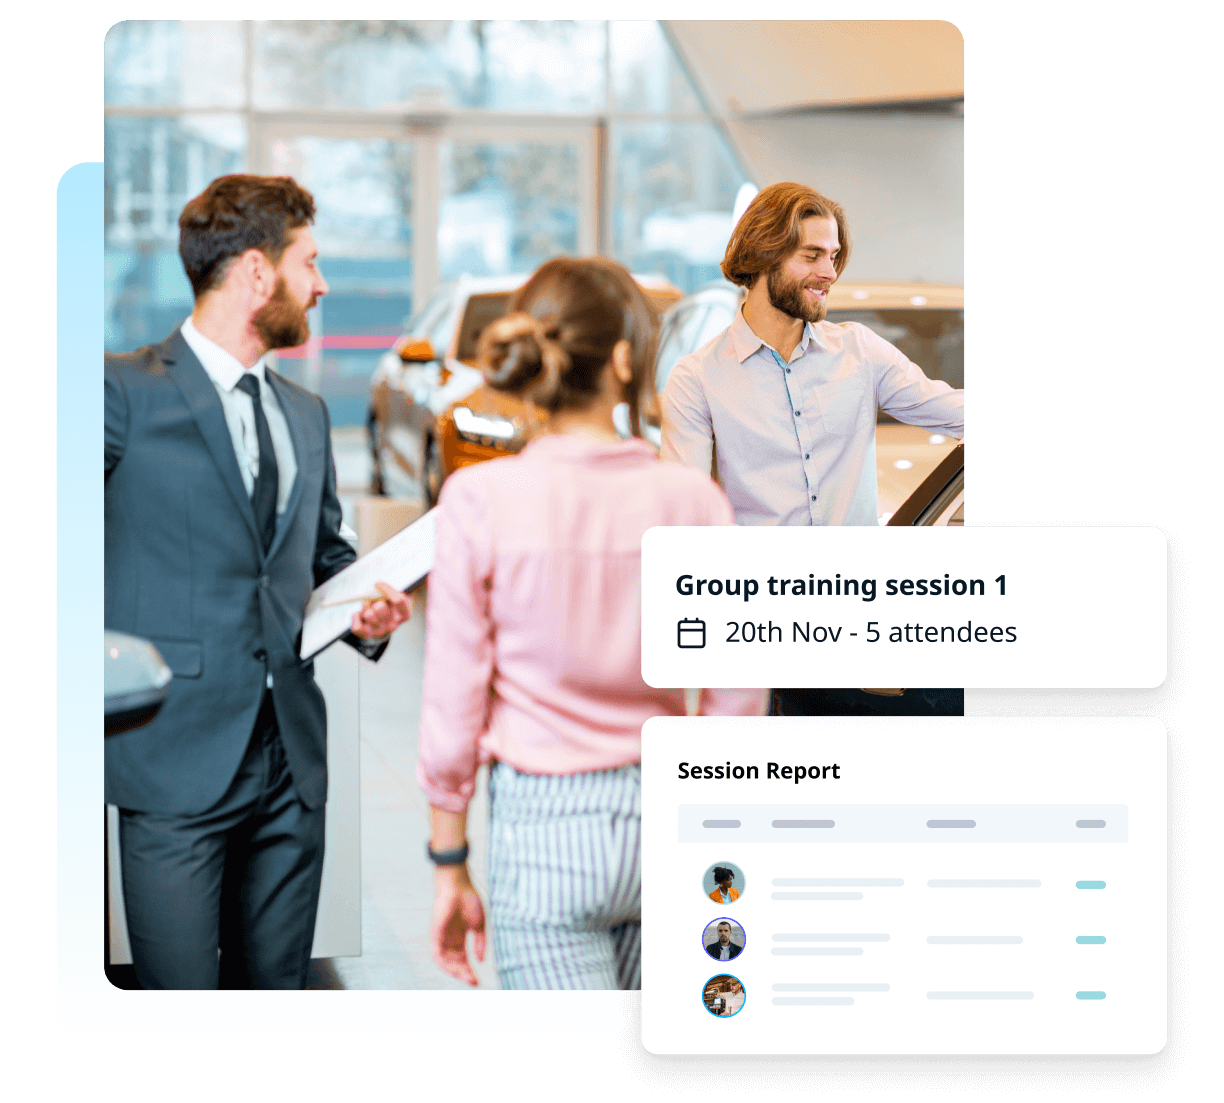 Treack in-person and digital training in one place